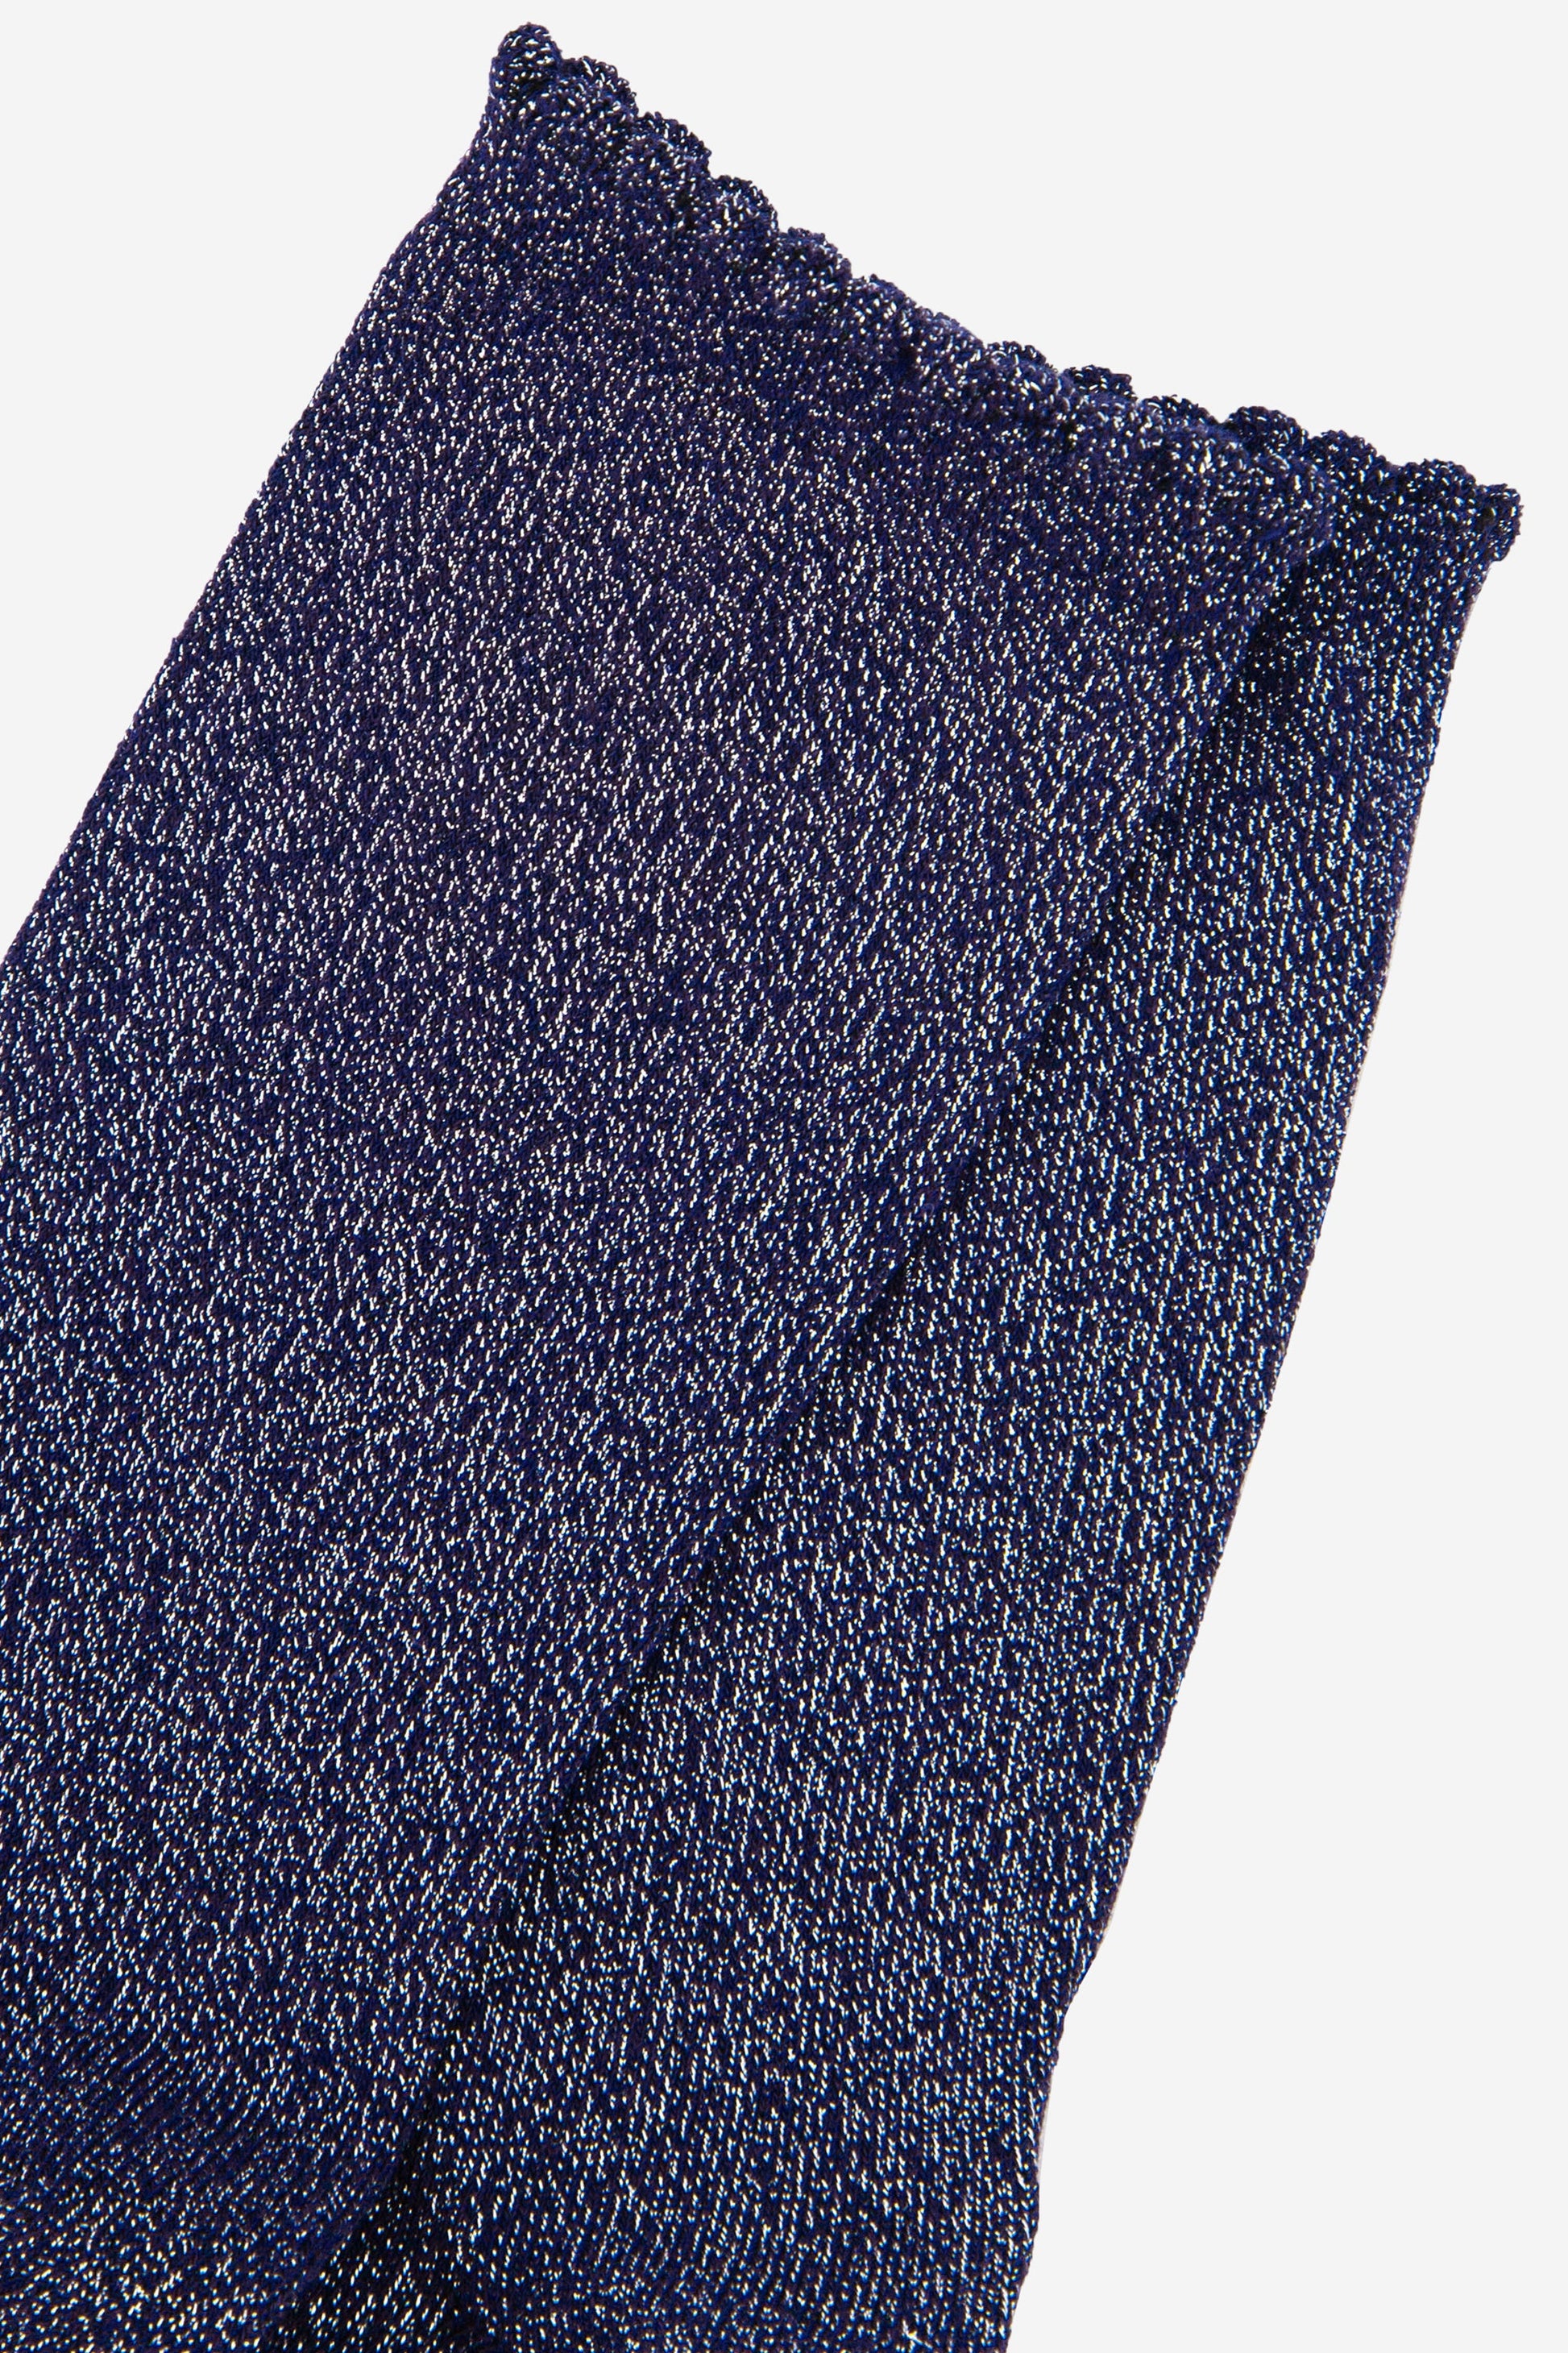 close up of the silver glitter sparkle on the navy blue ankle socks